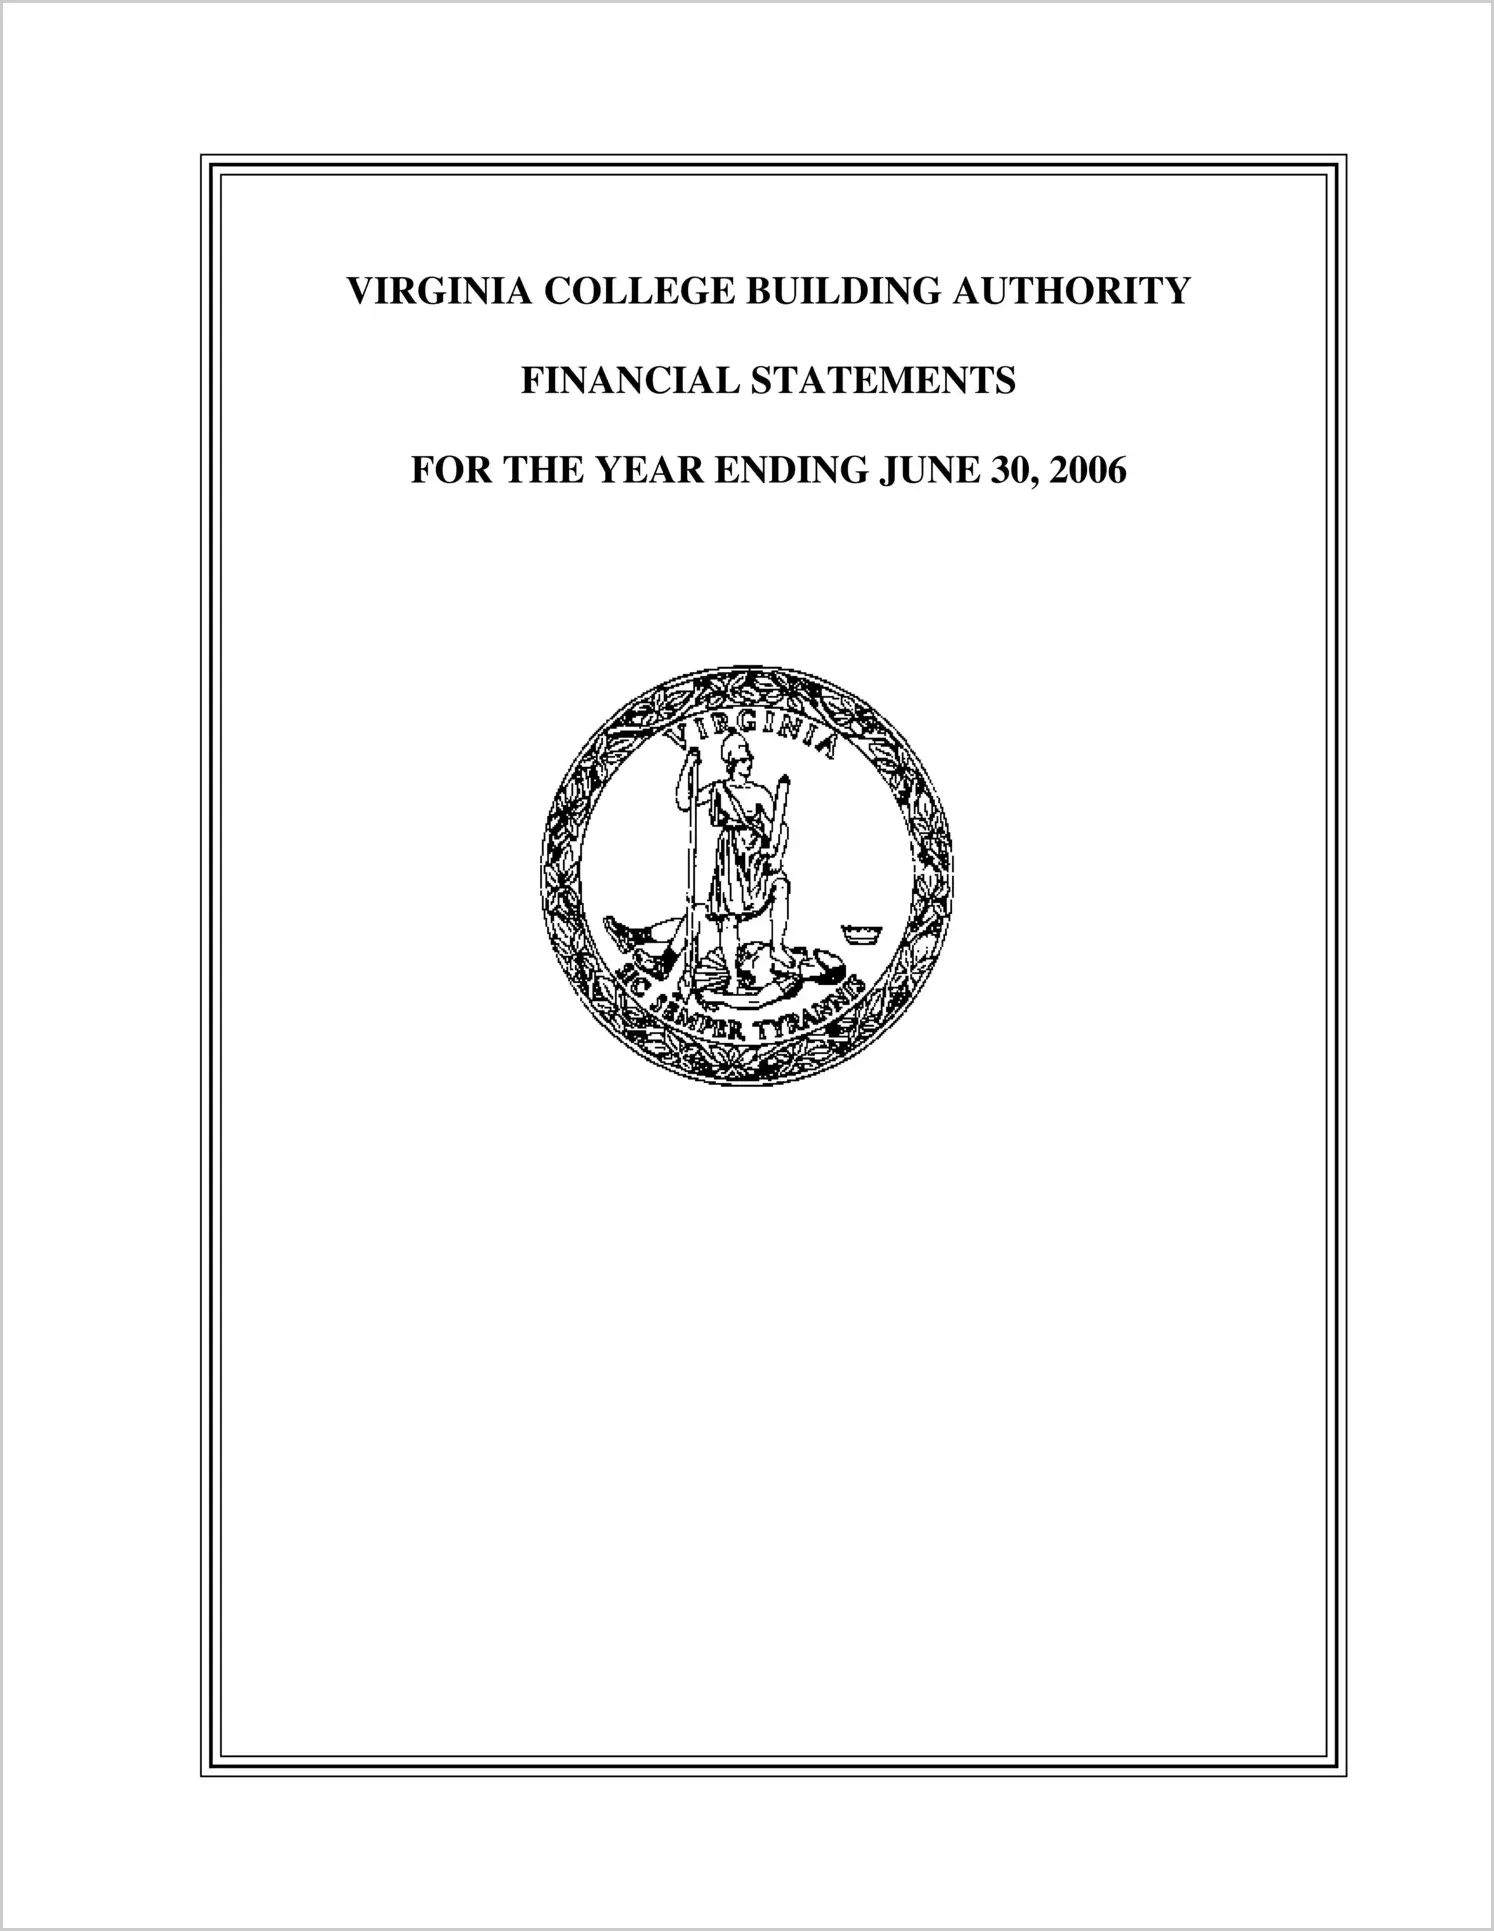 Virginia College Building Authority Financial Statements for the year ended June 30, 2006